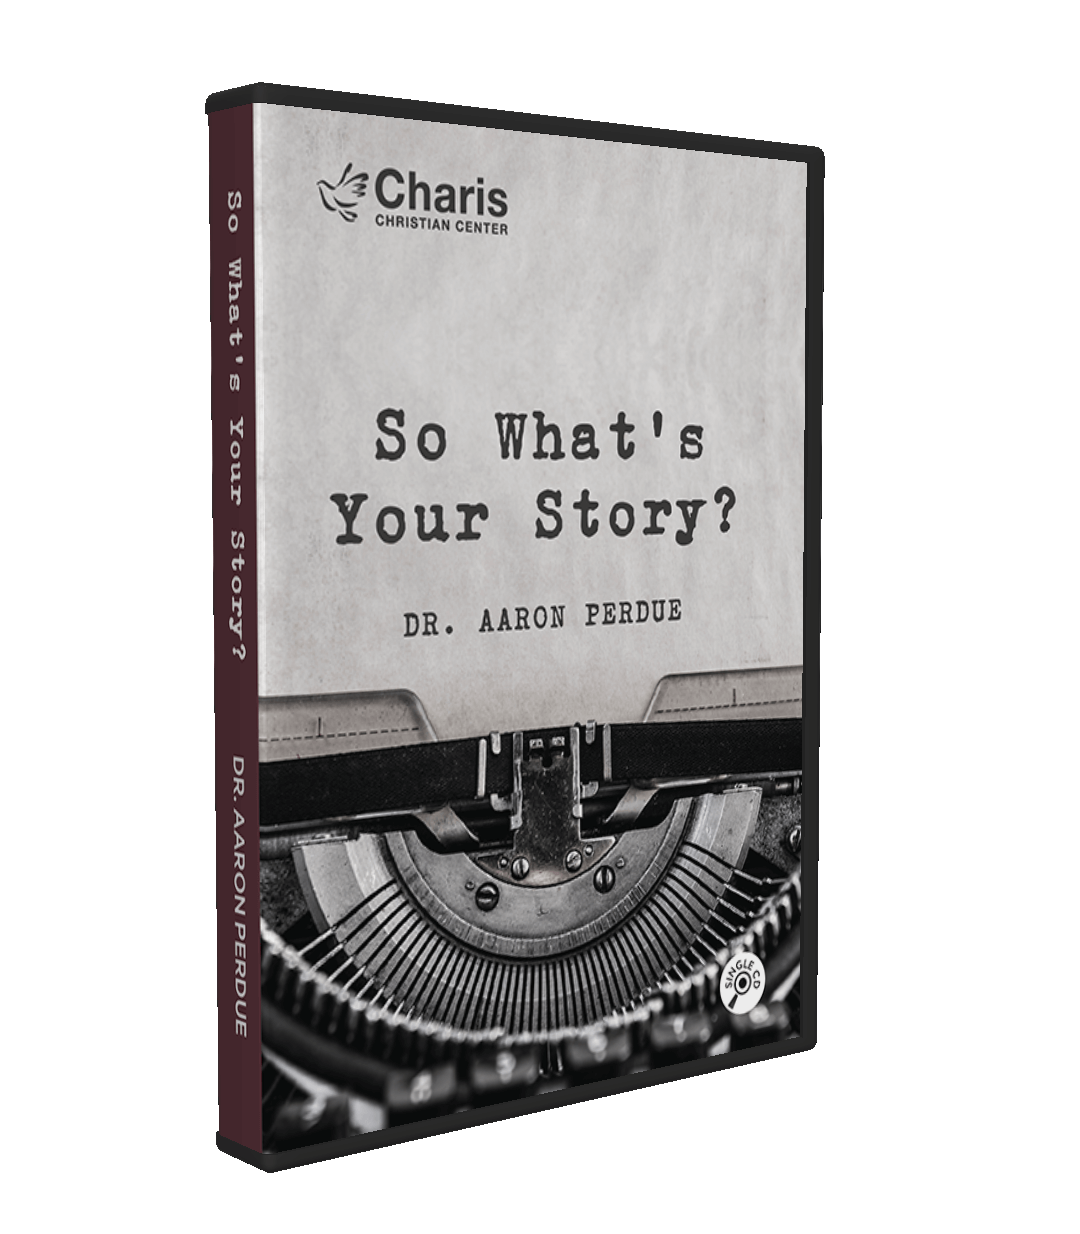 So What's Your Story Single CD Teaching from Dr. Aaron Perdue